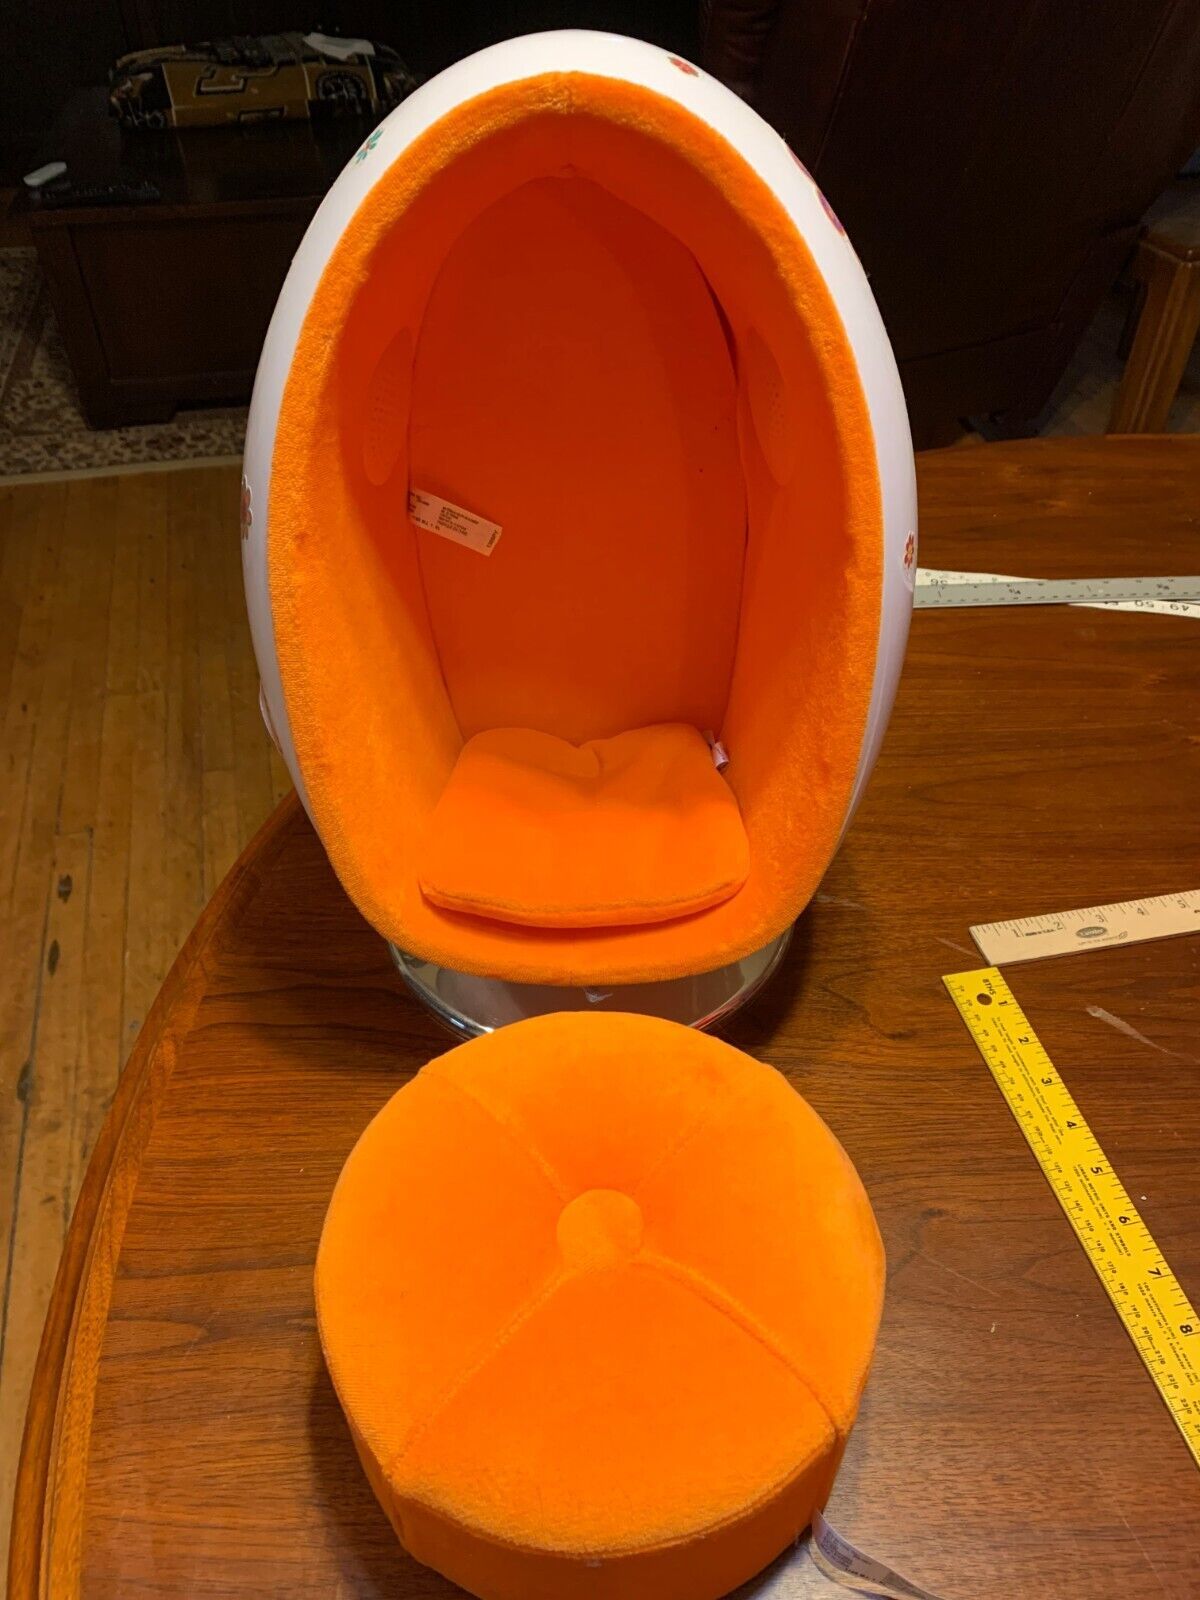 American Girl Doll Julie Orange Egg Chair Built In Speakers, Cable & Ottoman - $34.64